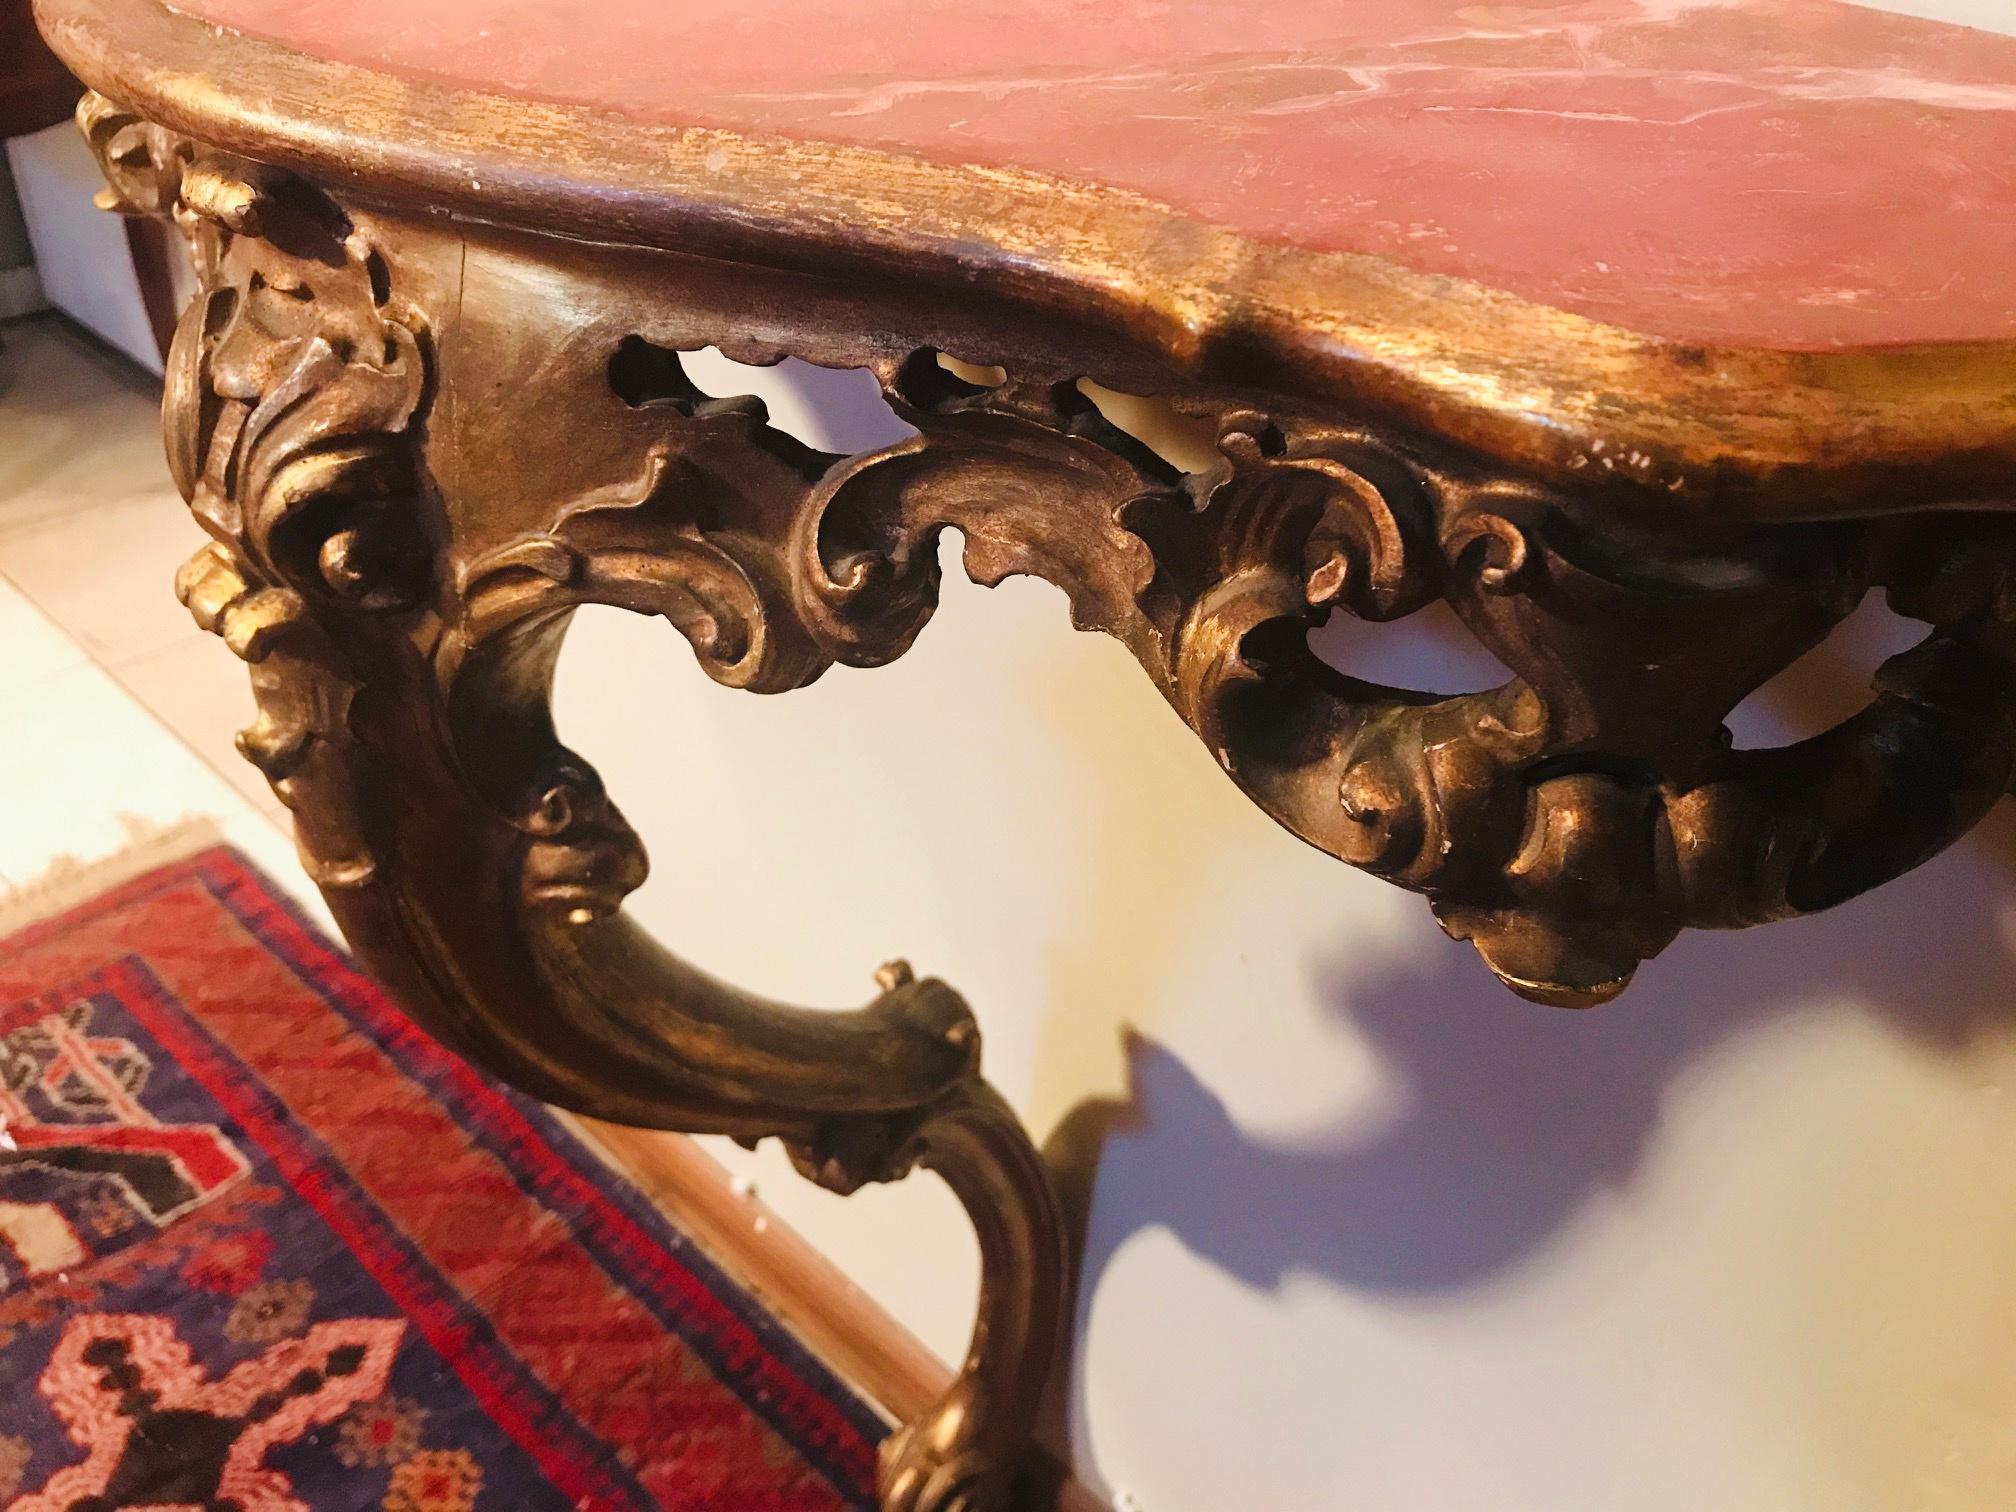 Vintage gold leaf French Louis XVI style console table with hand painted faux marble top

This decorative French console table was created circa 1920 in the Louis XVI style. The hand carved work is detailed in a floral and rocaille design. The